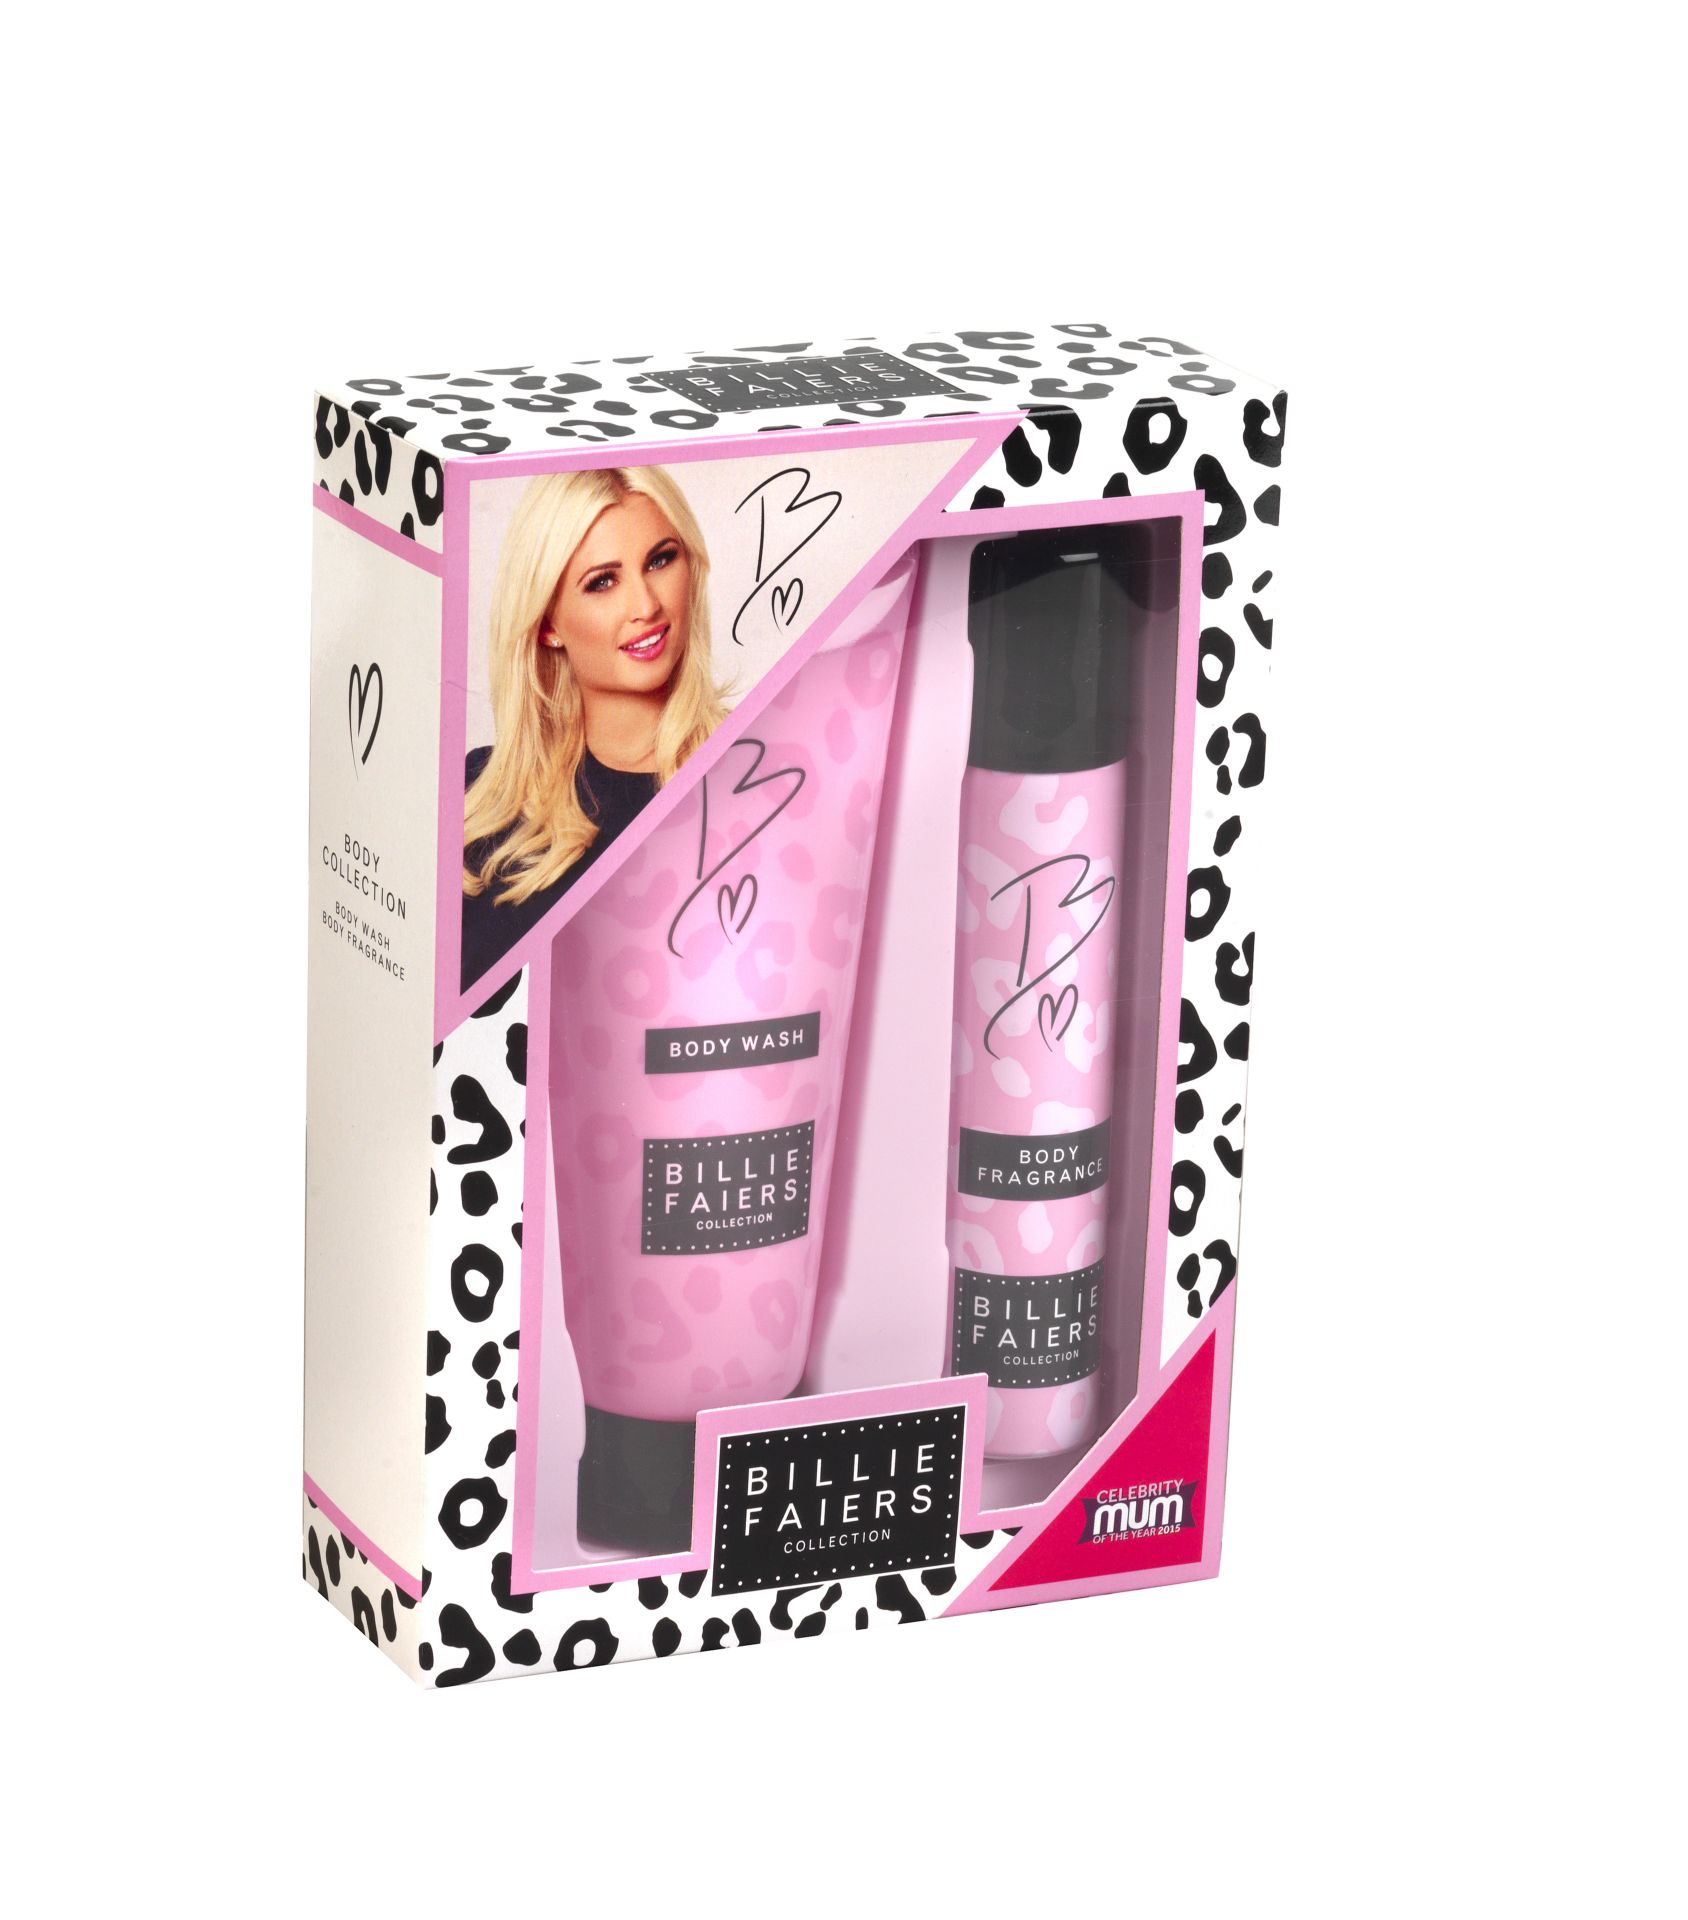 V *TRADE QTY* Brand New Billie Faiers Body Collection With Body Wash And Body Fragrance X 24 Bid